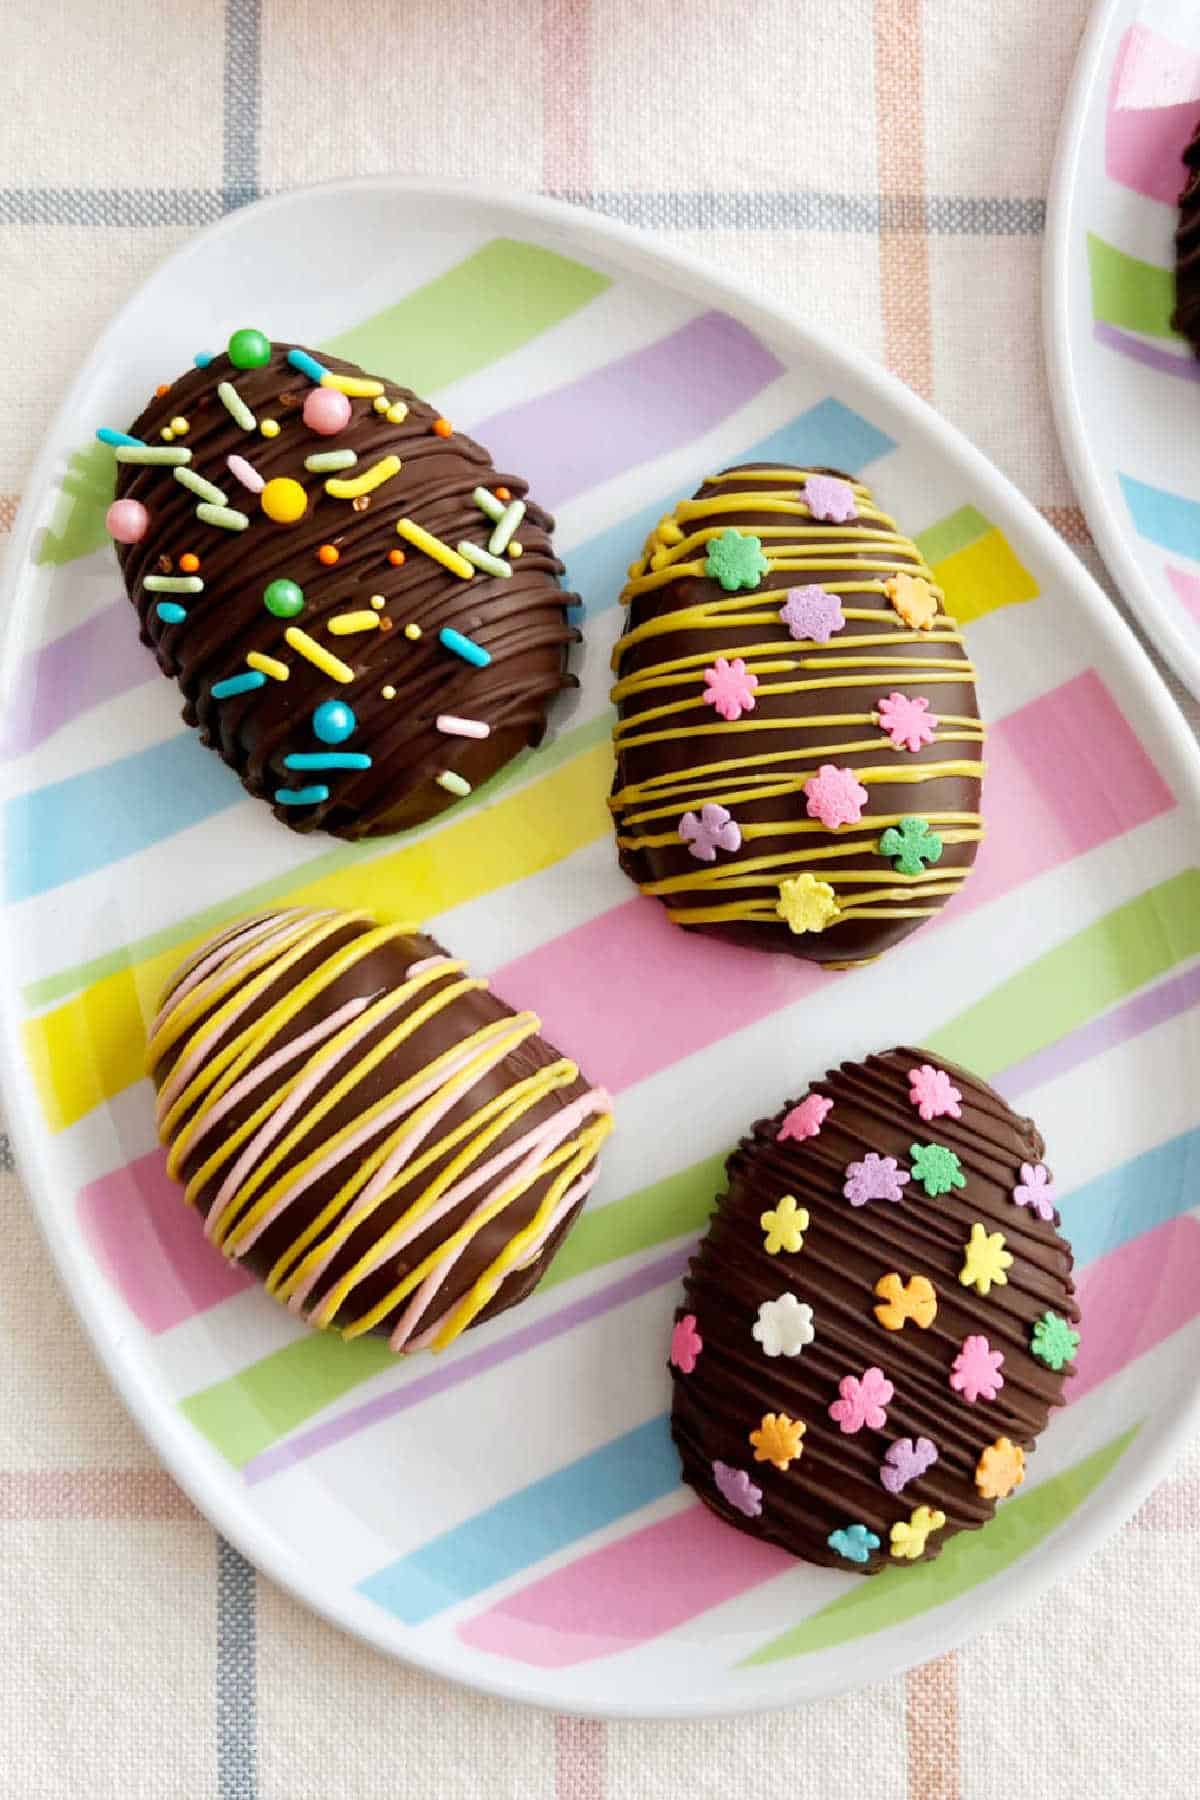 chocolate coated peanut butter eggs on an Easter egg plate.